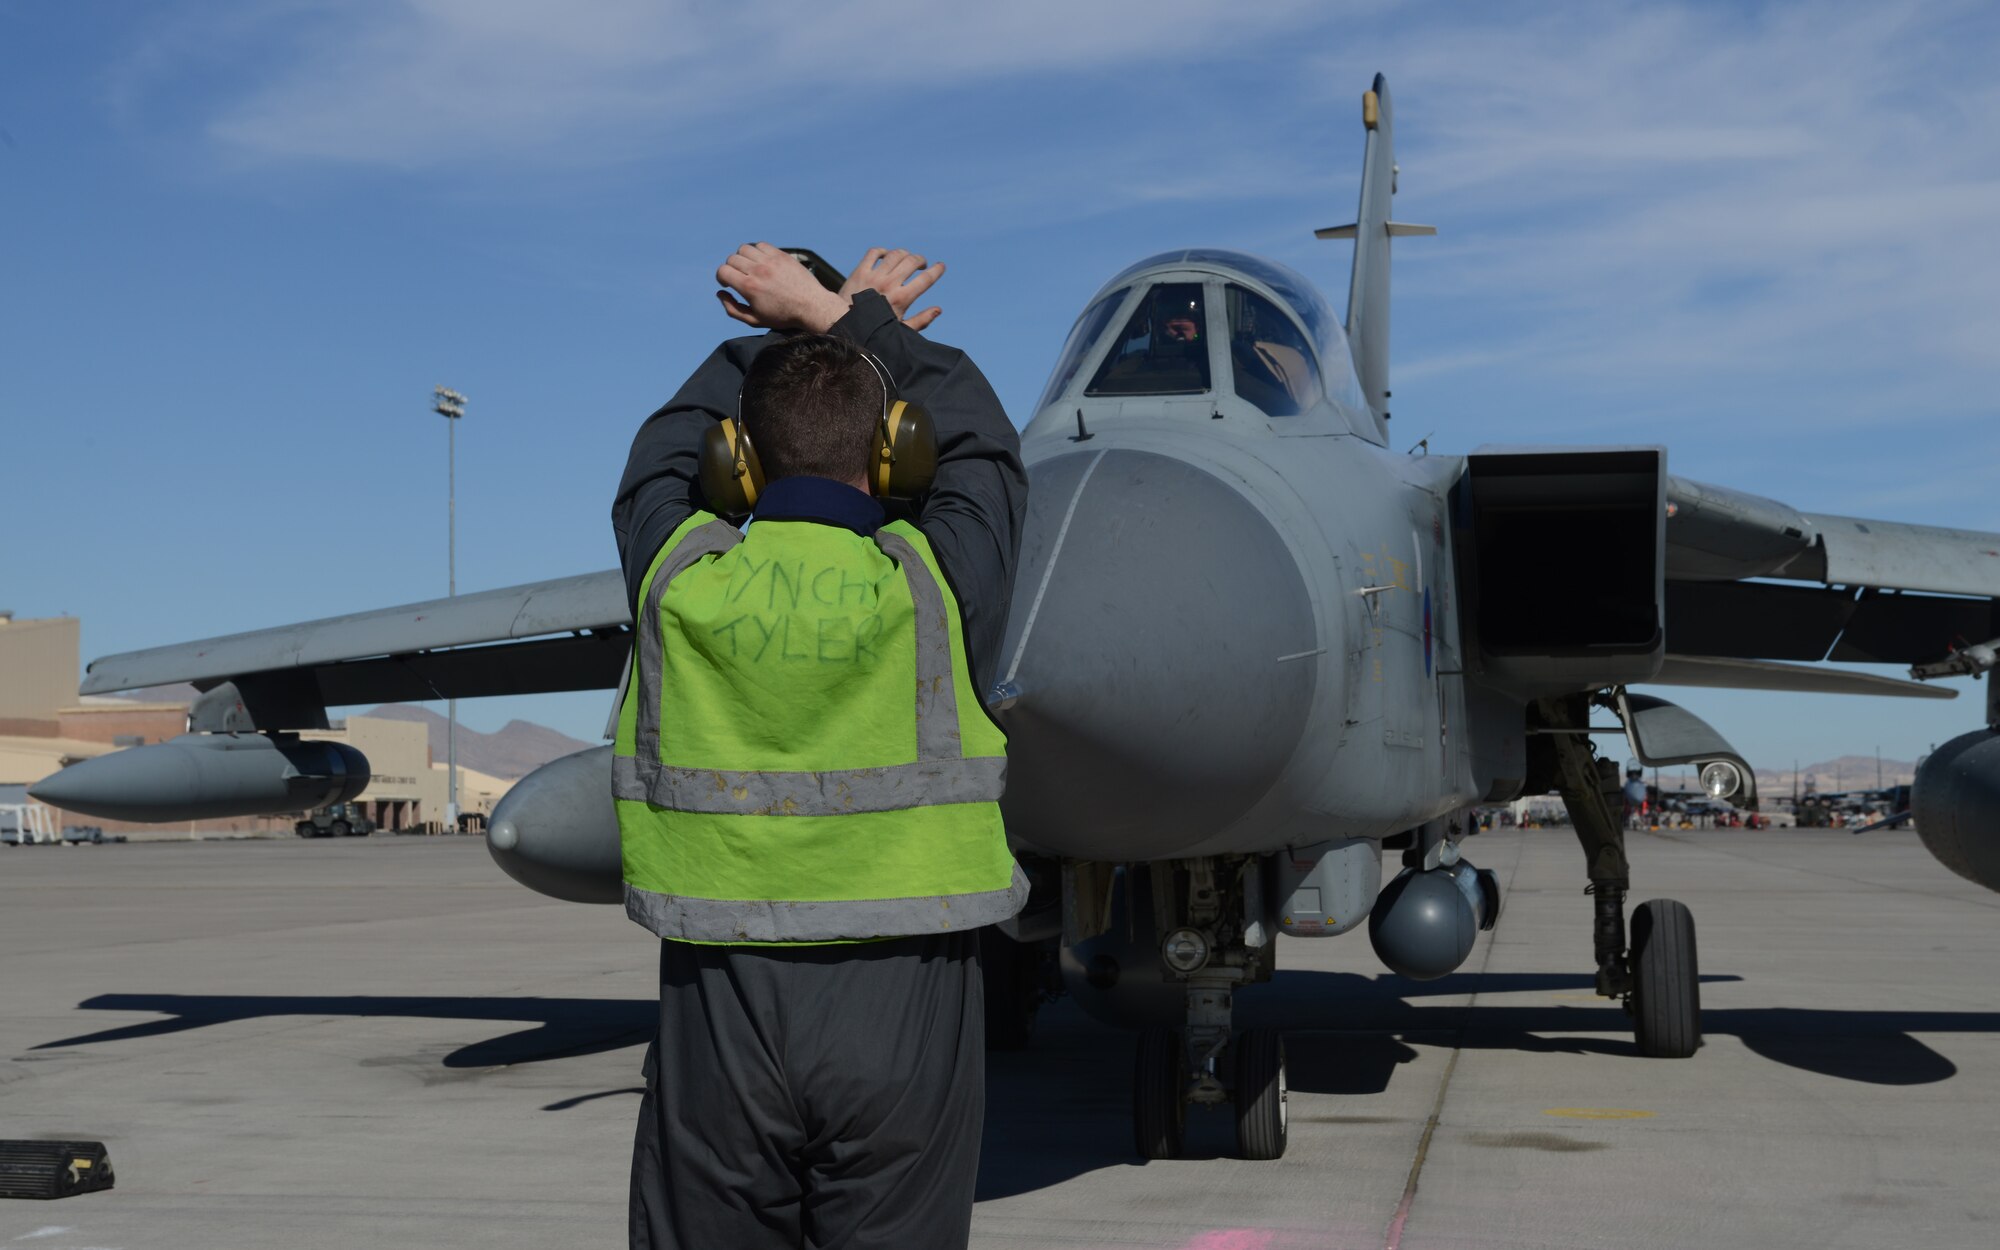 British Royal Air Force Senior Aircraftman Tyler Kerridge uses hand signals to halt a Tornado GR4 upon its arrival at Nellis Air Force Base, Nev., Jan. 22, 2013. Members of the IX (B) Squadron arrived later in the day in preparation for Red Flag 14-1. (U.S. Air Force photo by Senior Airman Benjamin Sutton/Released)